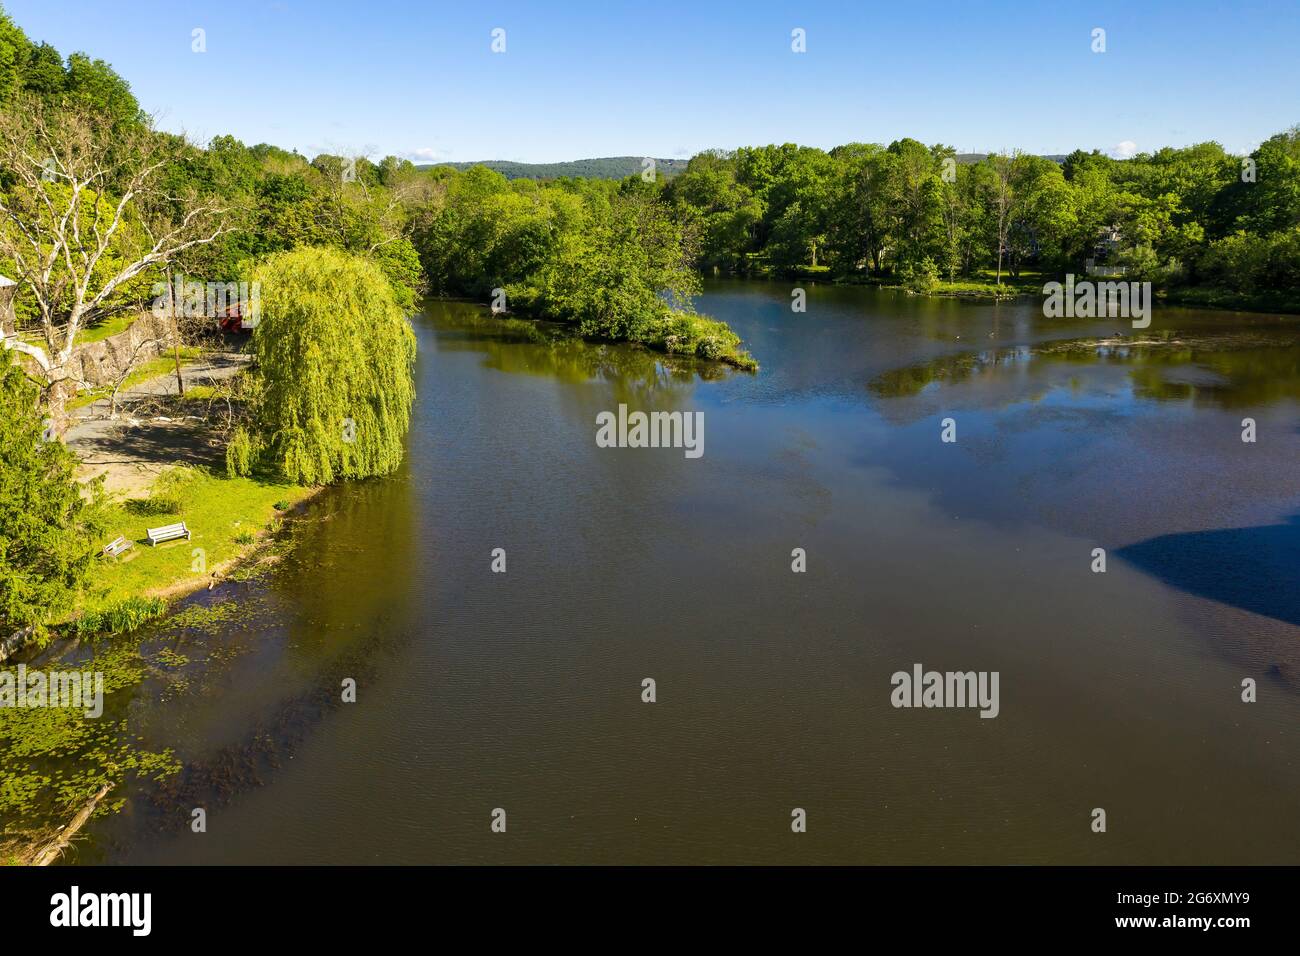 Aerial of river in Clinton, New Jersey, with green trees and a weeping willow tree near the water's edge. Stock Photo